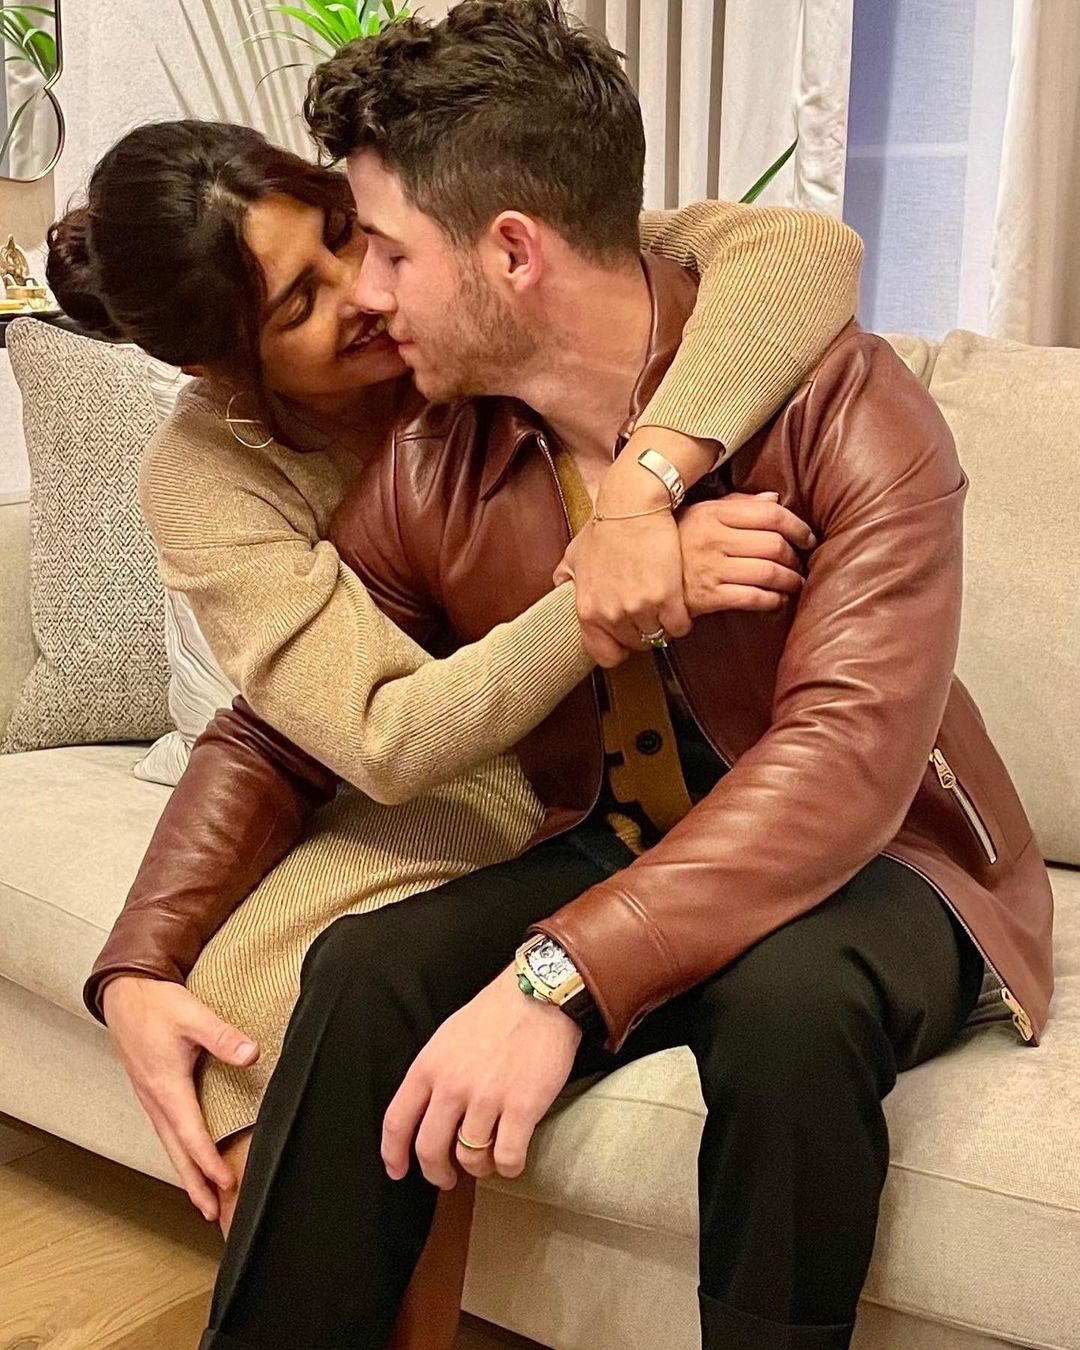 Not only Nick Jonas has accepted Hindi traditions, but even Priyanka Chopra is perfectly blending with western traditions. Speaking of which, here’s a picture of the duo celebrating Thanksgiving together. (Image: Instagram)